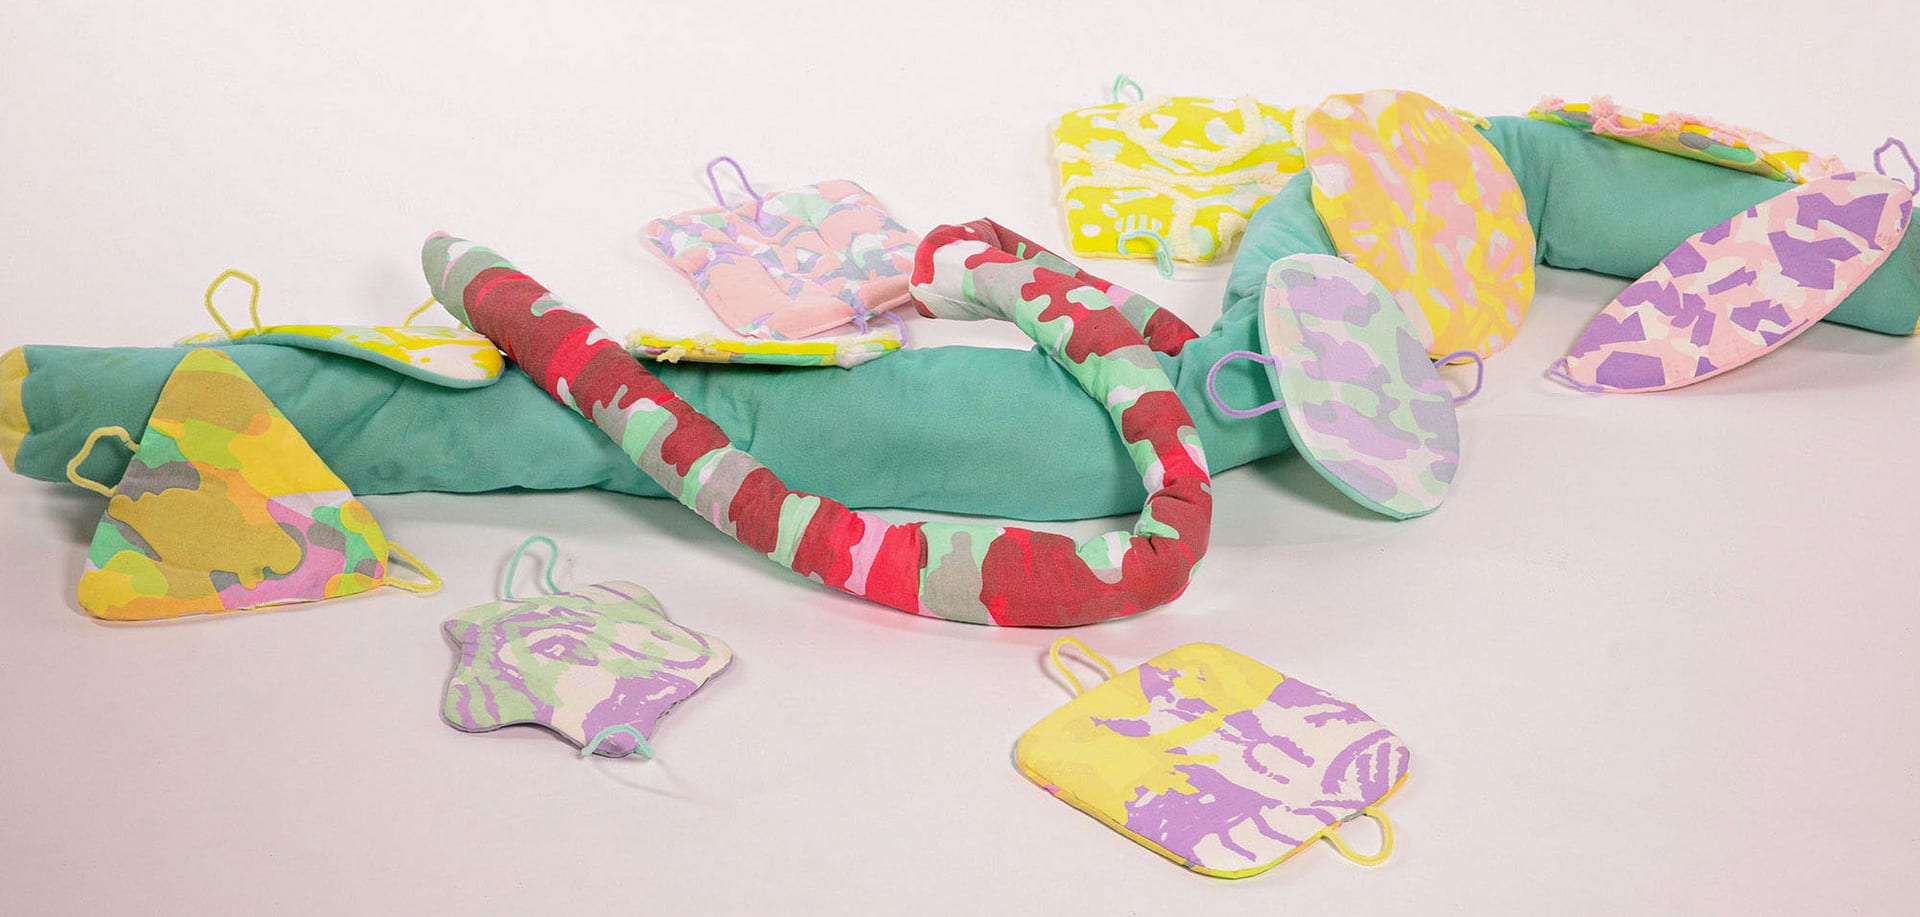 Multi-colour printed textile snakes and patches arranged in the white background. 